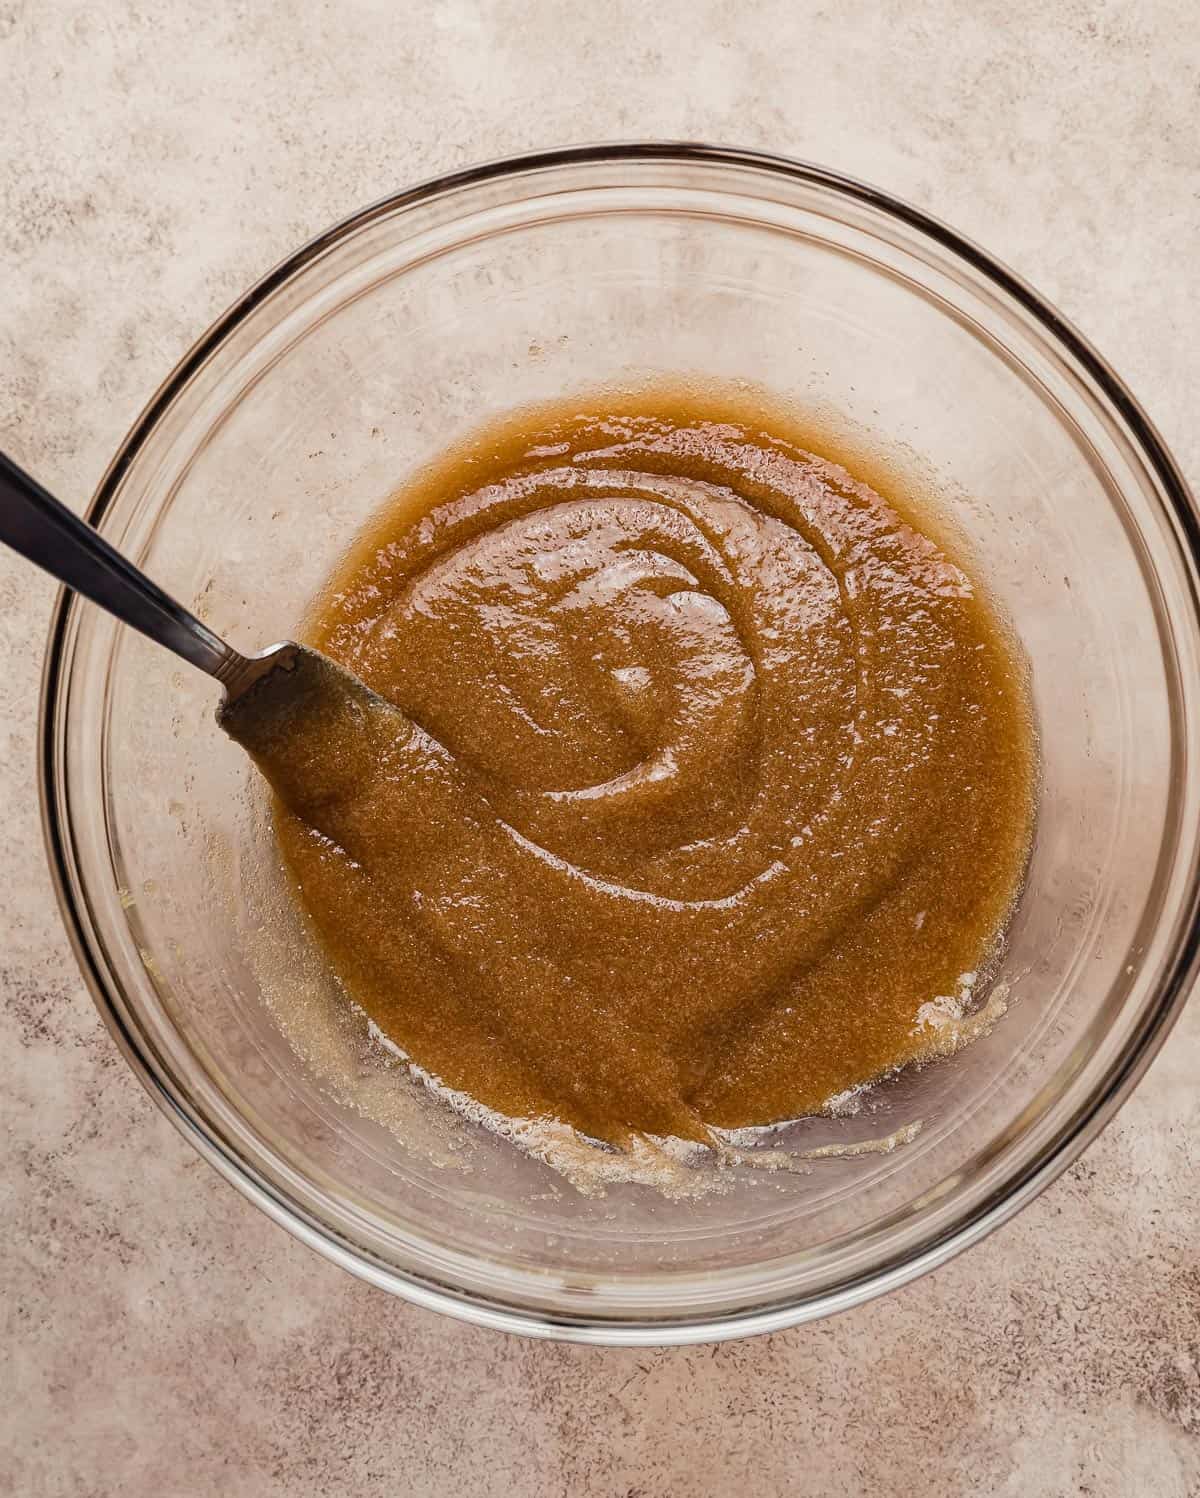 A dark brown colored sugar mixture in a glass bowl on a brown textured background.